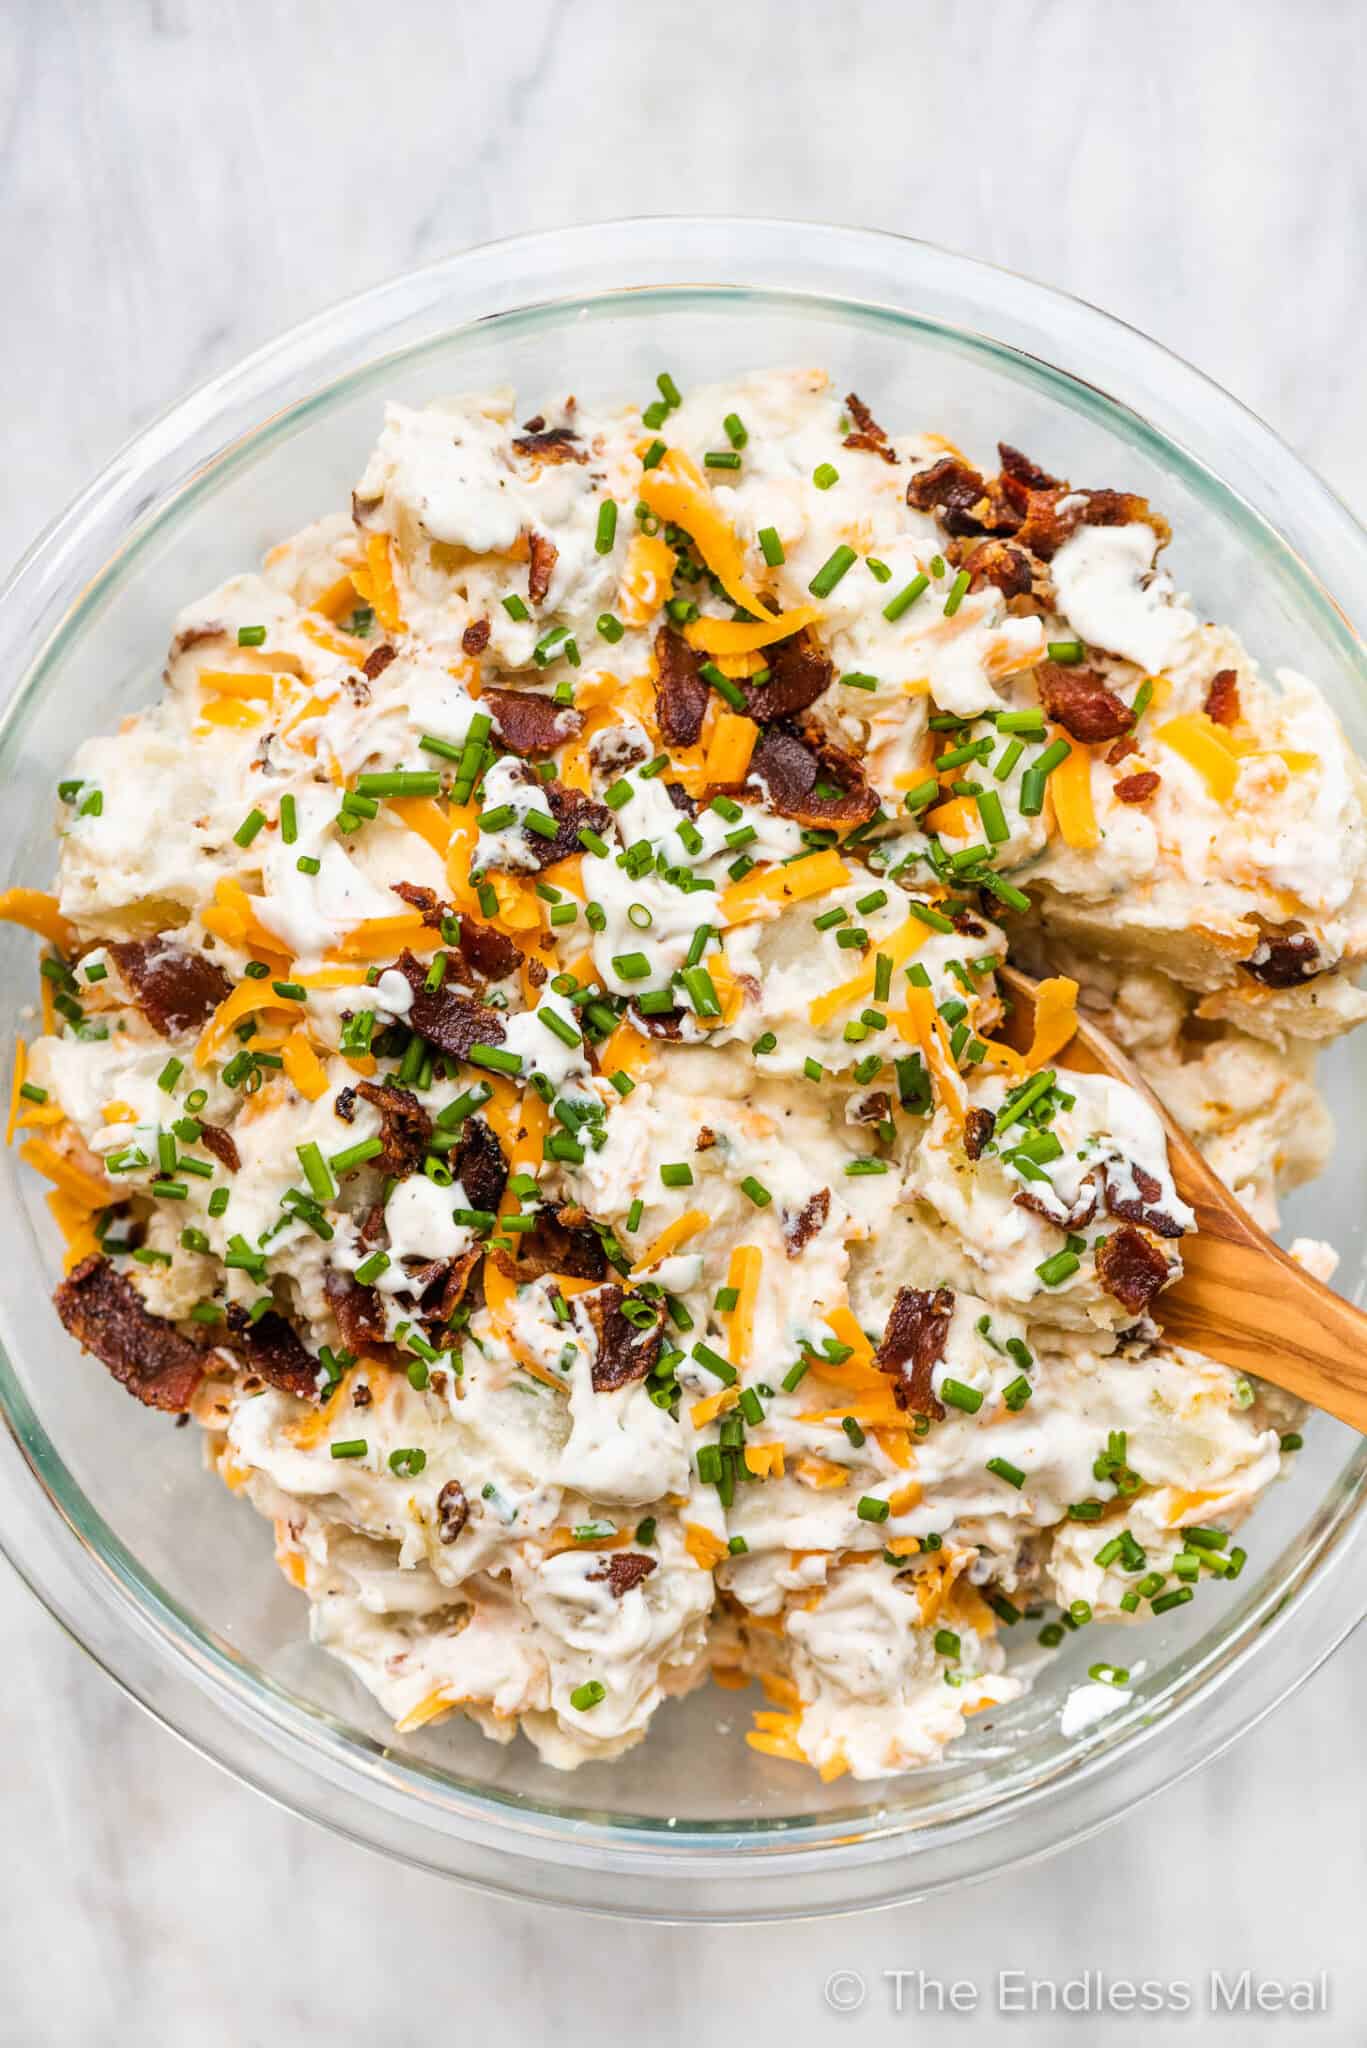 Loaded baked potato salad in a glass bowl with a wooden spoon.